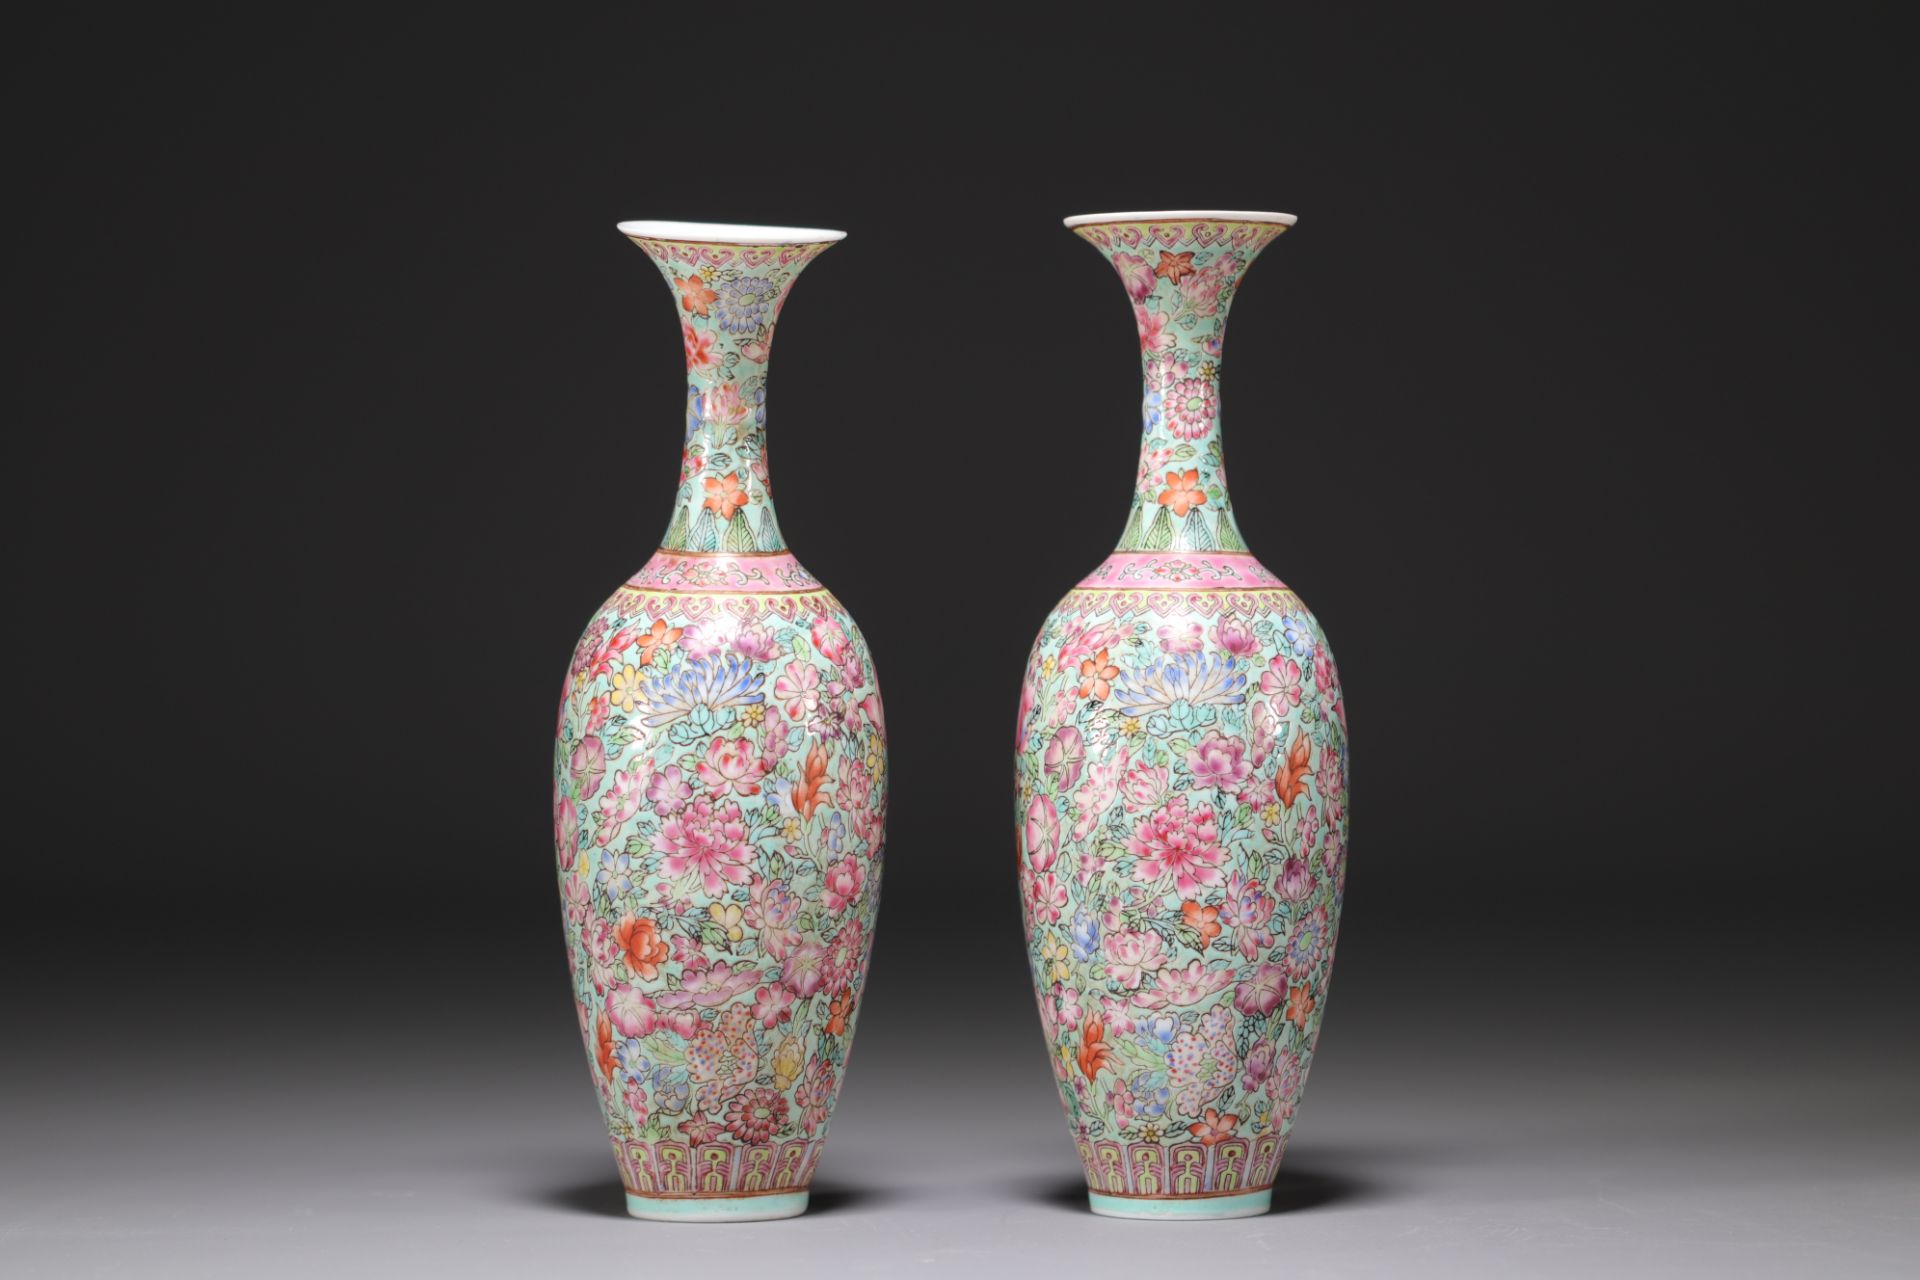 China - A pair of eggshell porcelain vases with floral decoration. - Image 3 of 5